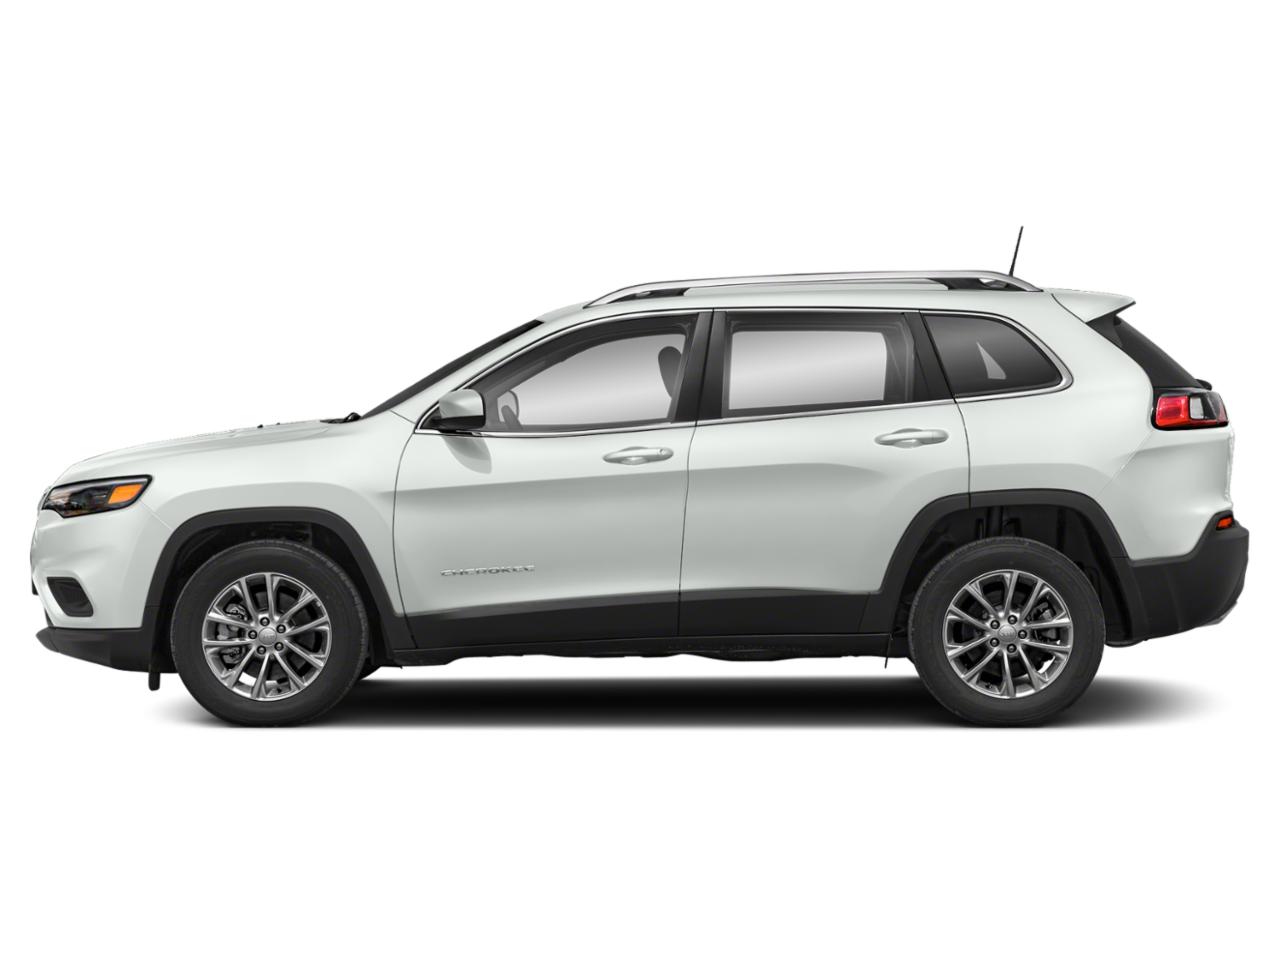 Used 2019 Jeep Cherokee Latitude with VIN 1C4PJLCB8KD175683 for sale in Columbus, MS